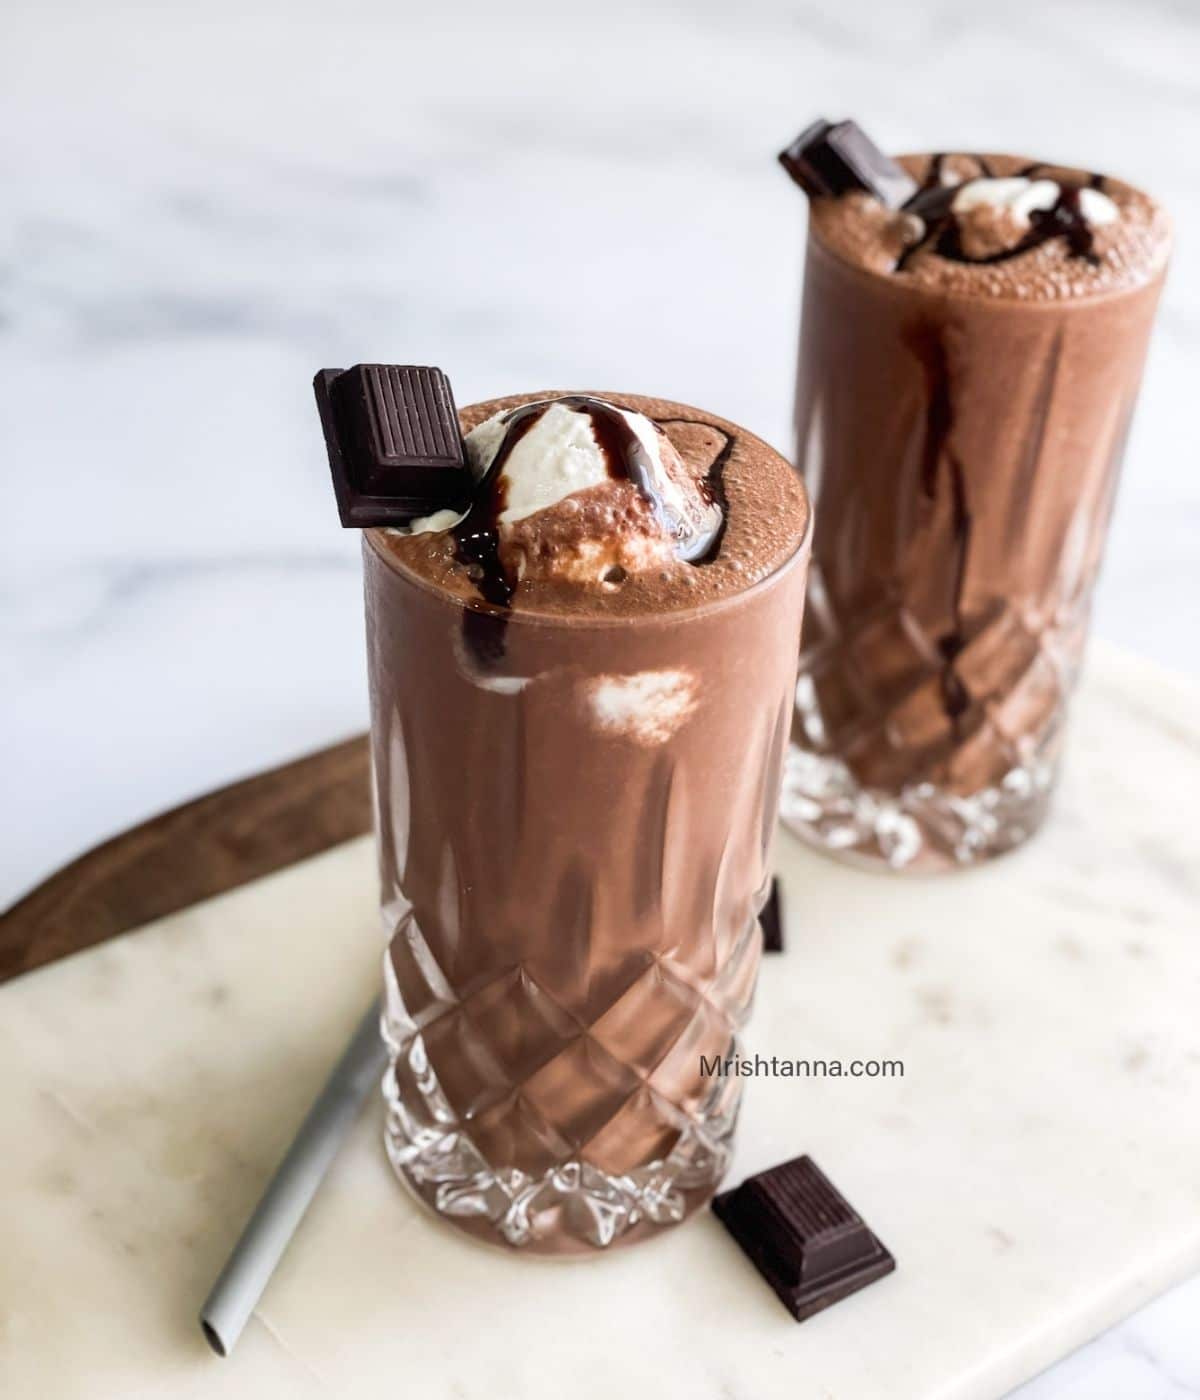 Two glasses are filled with vegan chocolate milkshake and topped with ice cream and chocolate.